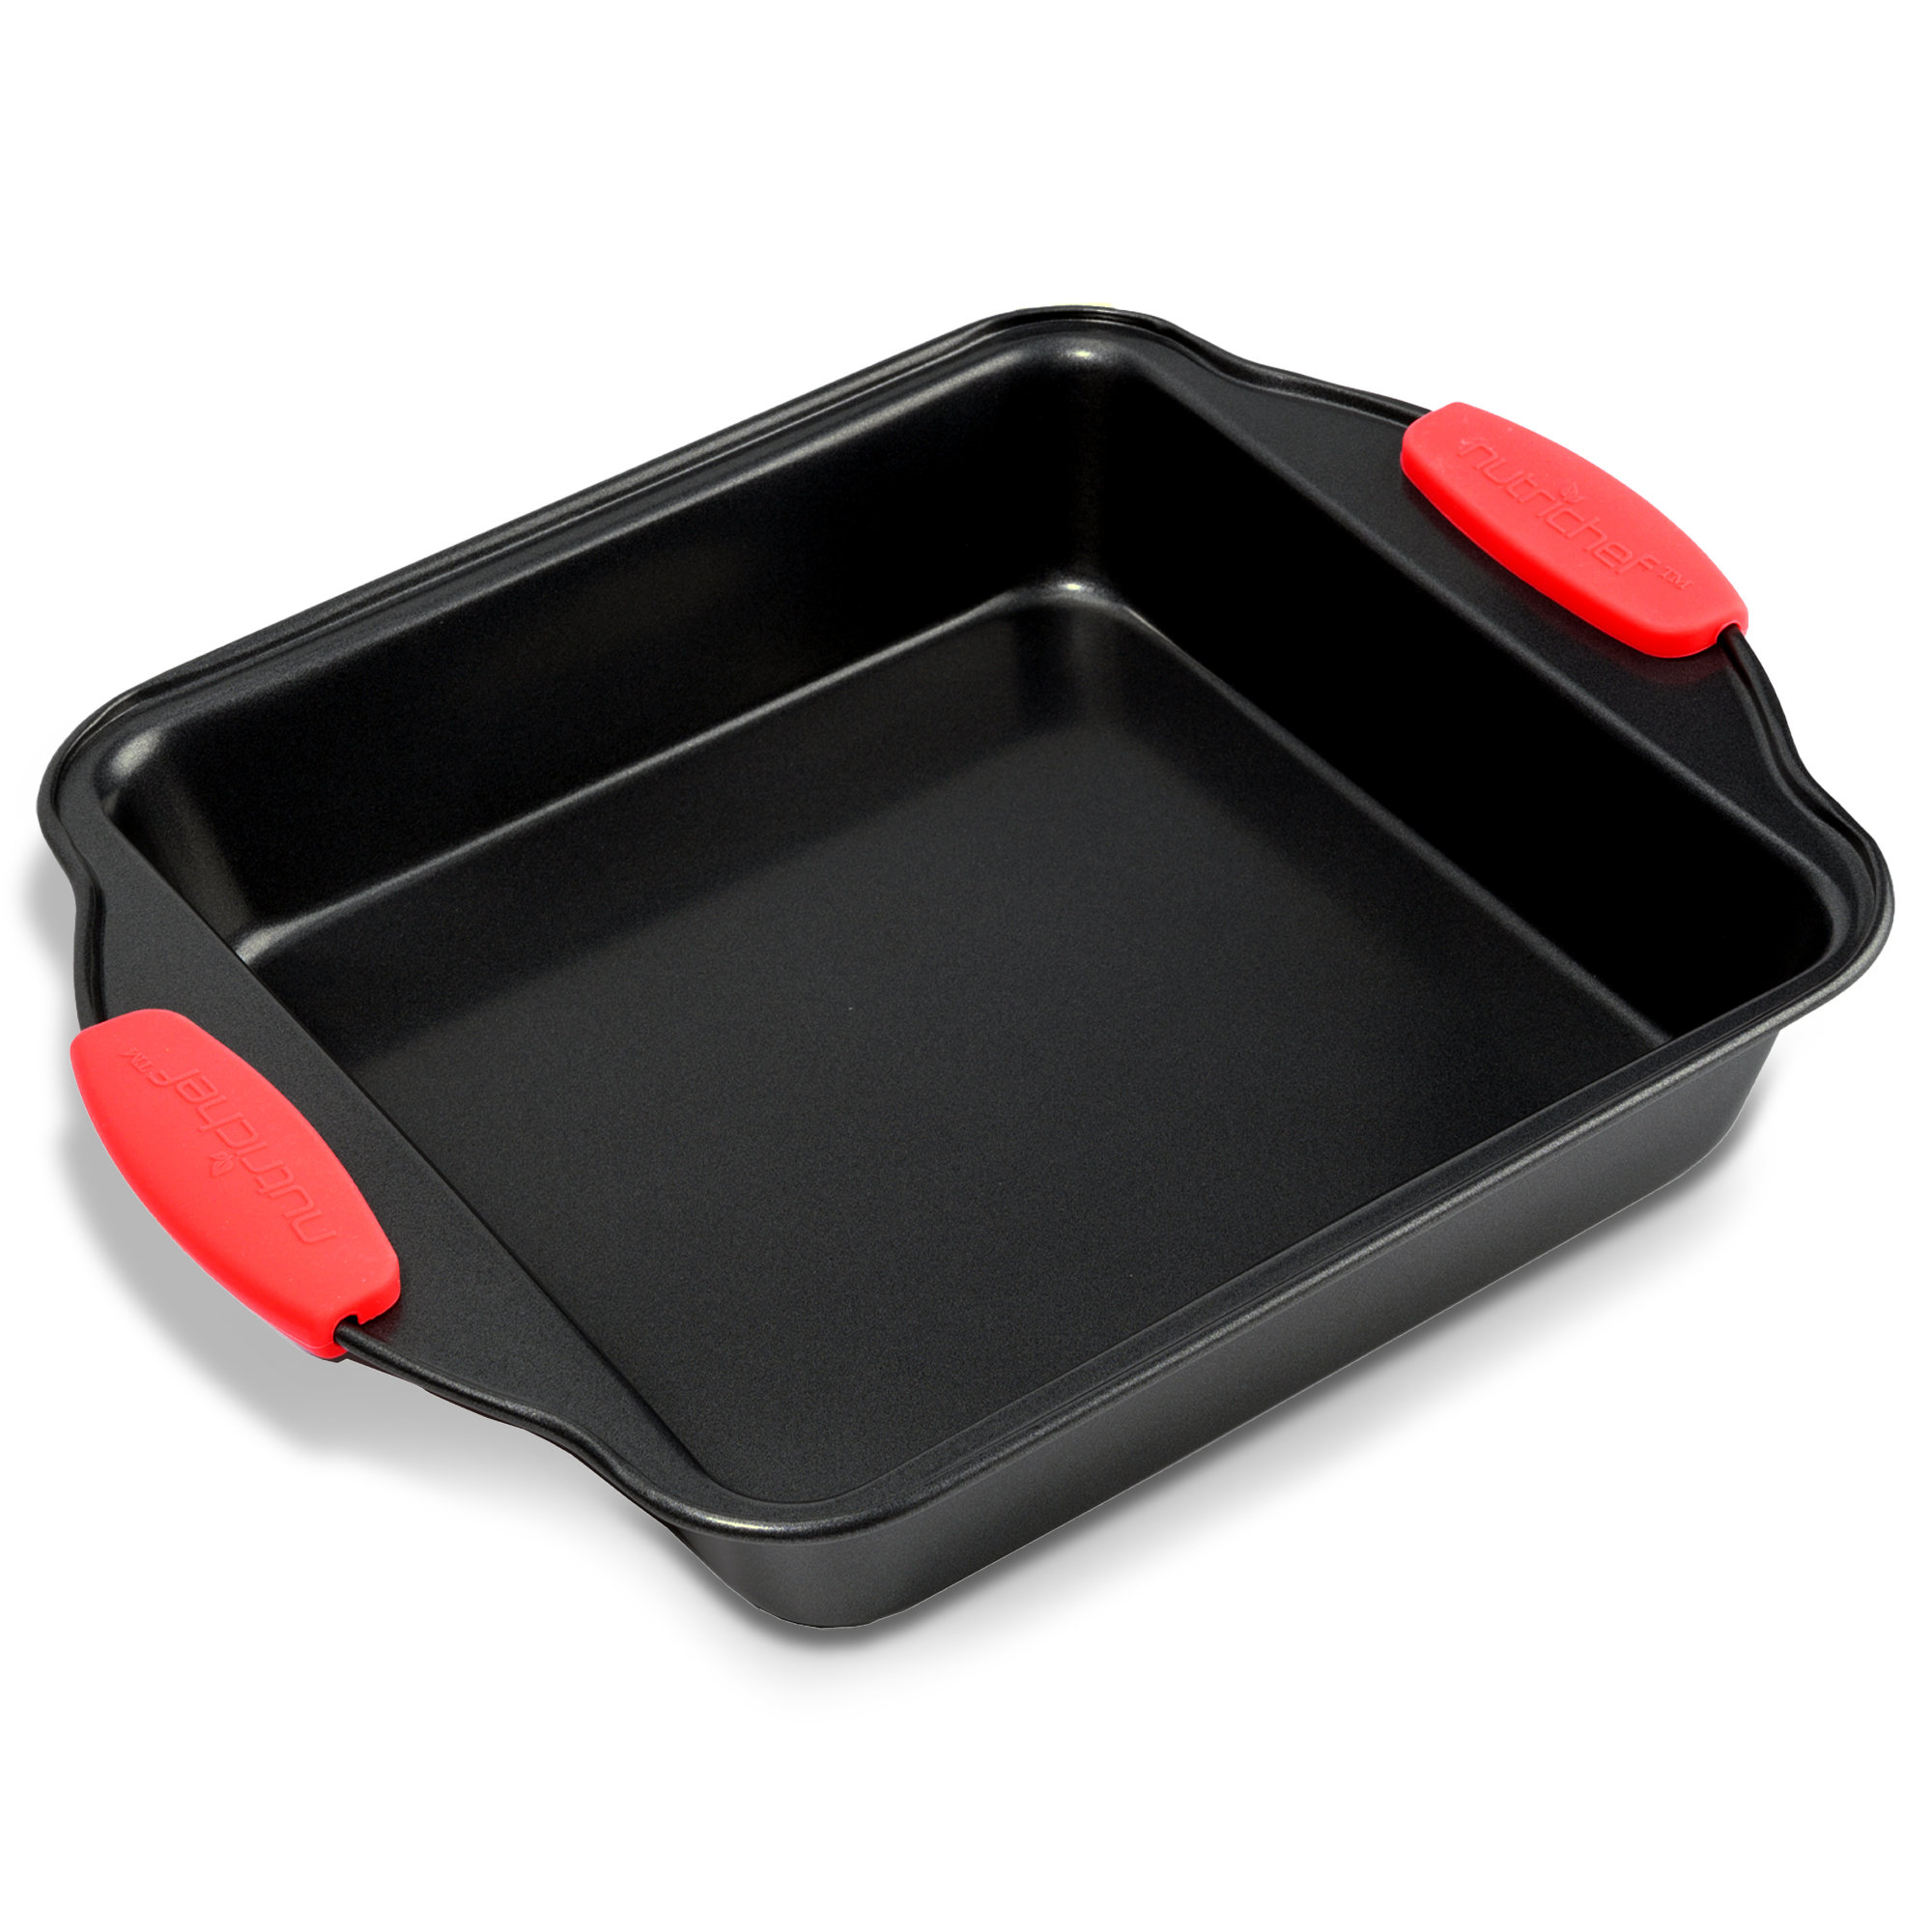 9 x 13 Cake Pan with Lid – Anolon